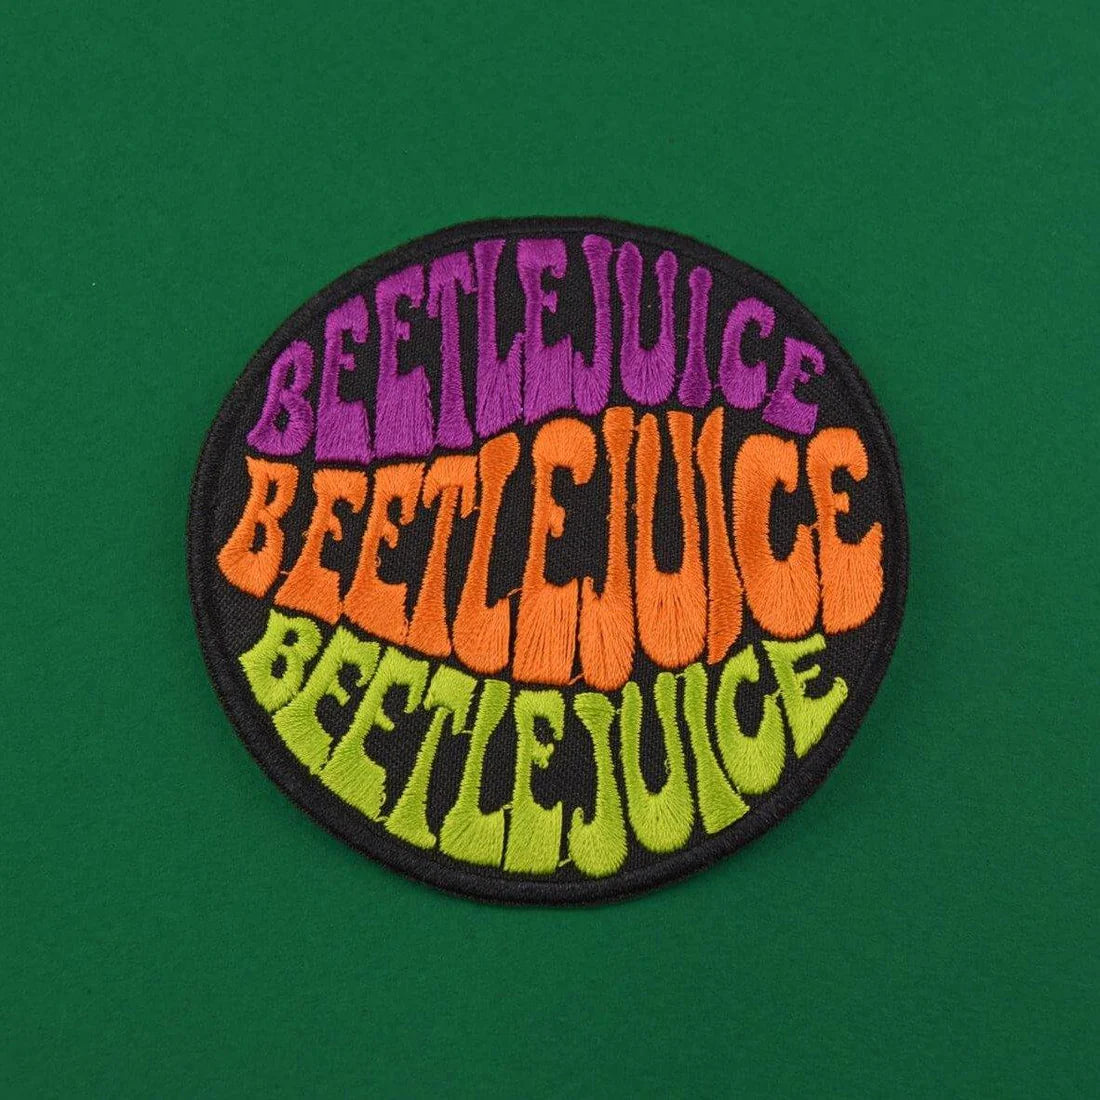 Beetlejuice round Patch - Extreme Largeness